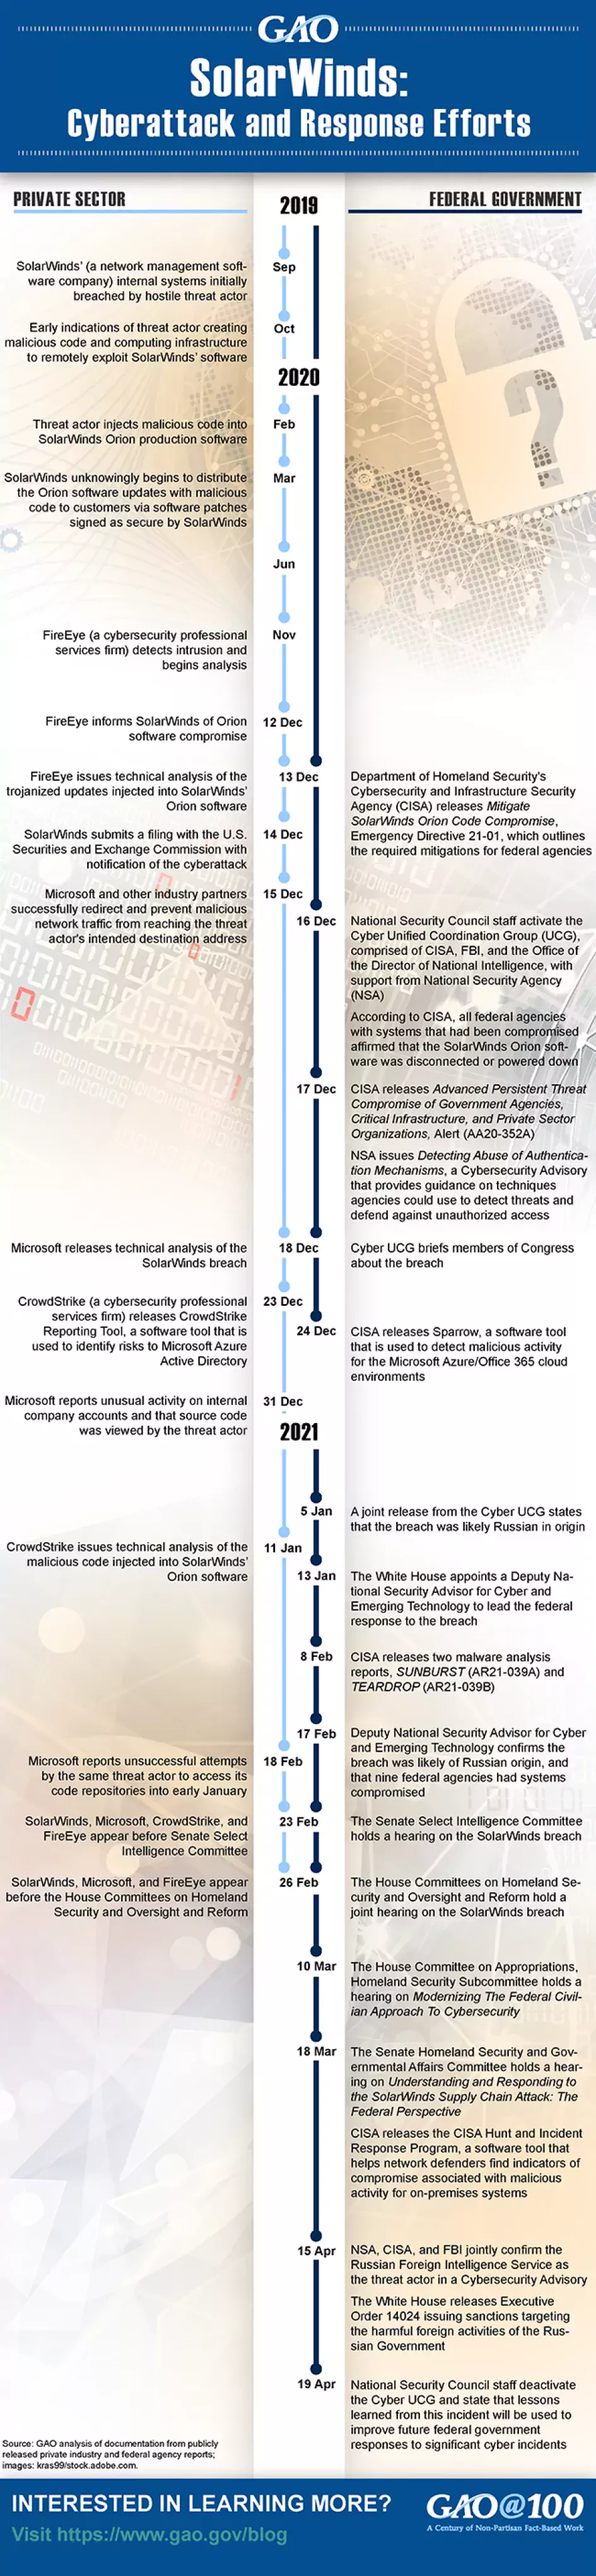 Infographic/timeline showing the SolarWinds cyberattacks and the government's response